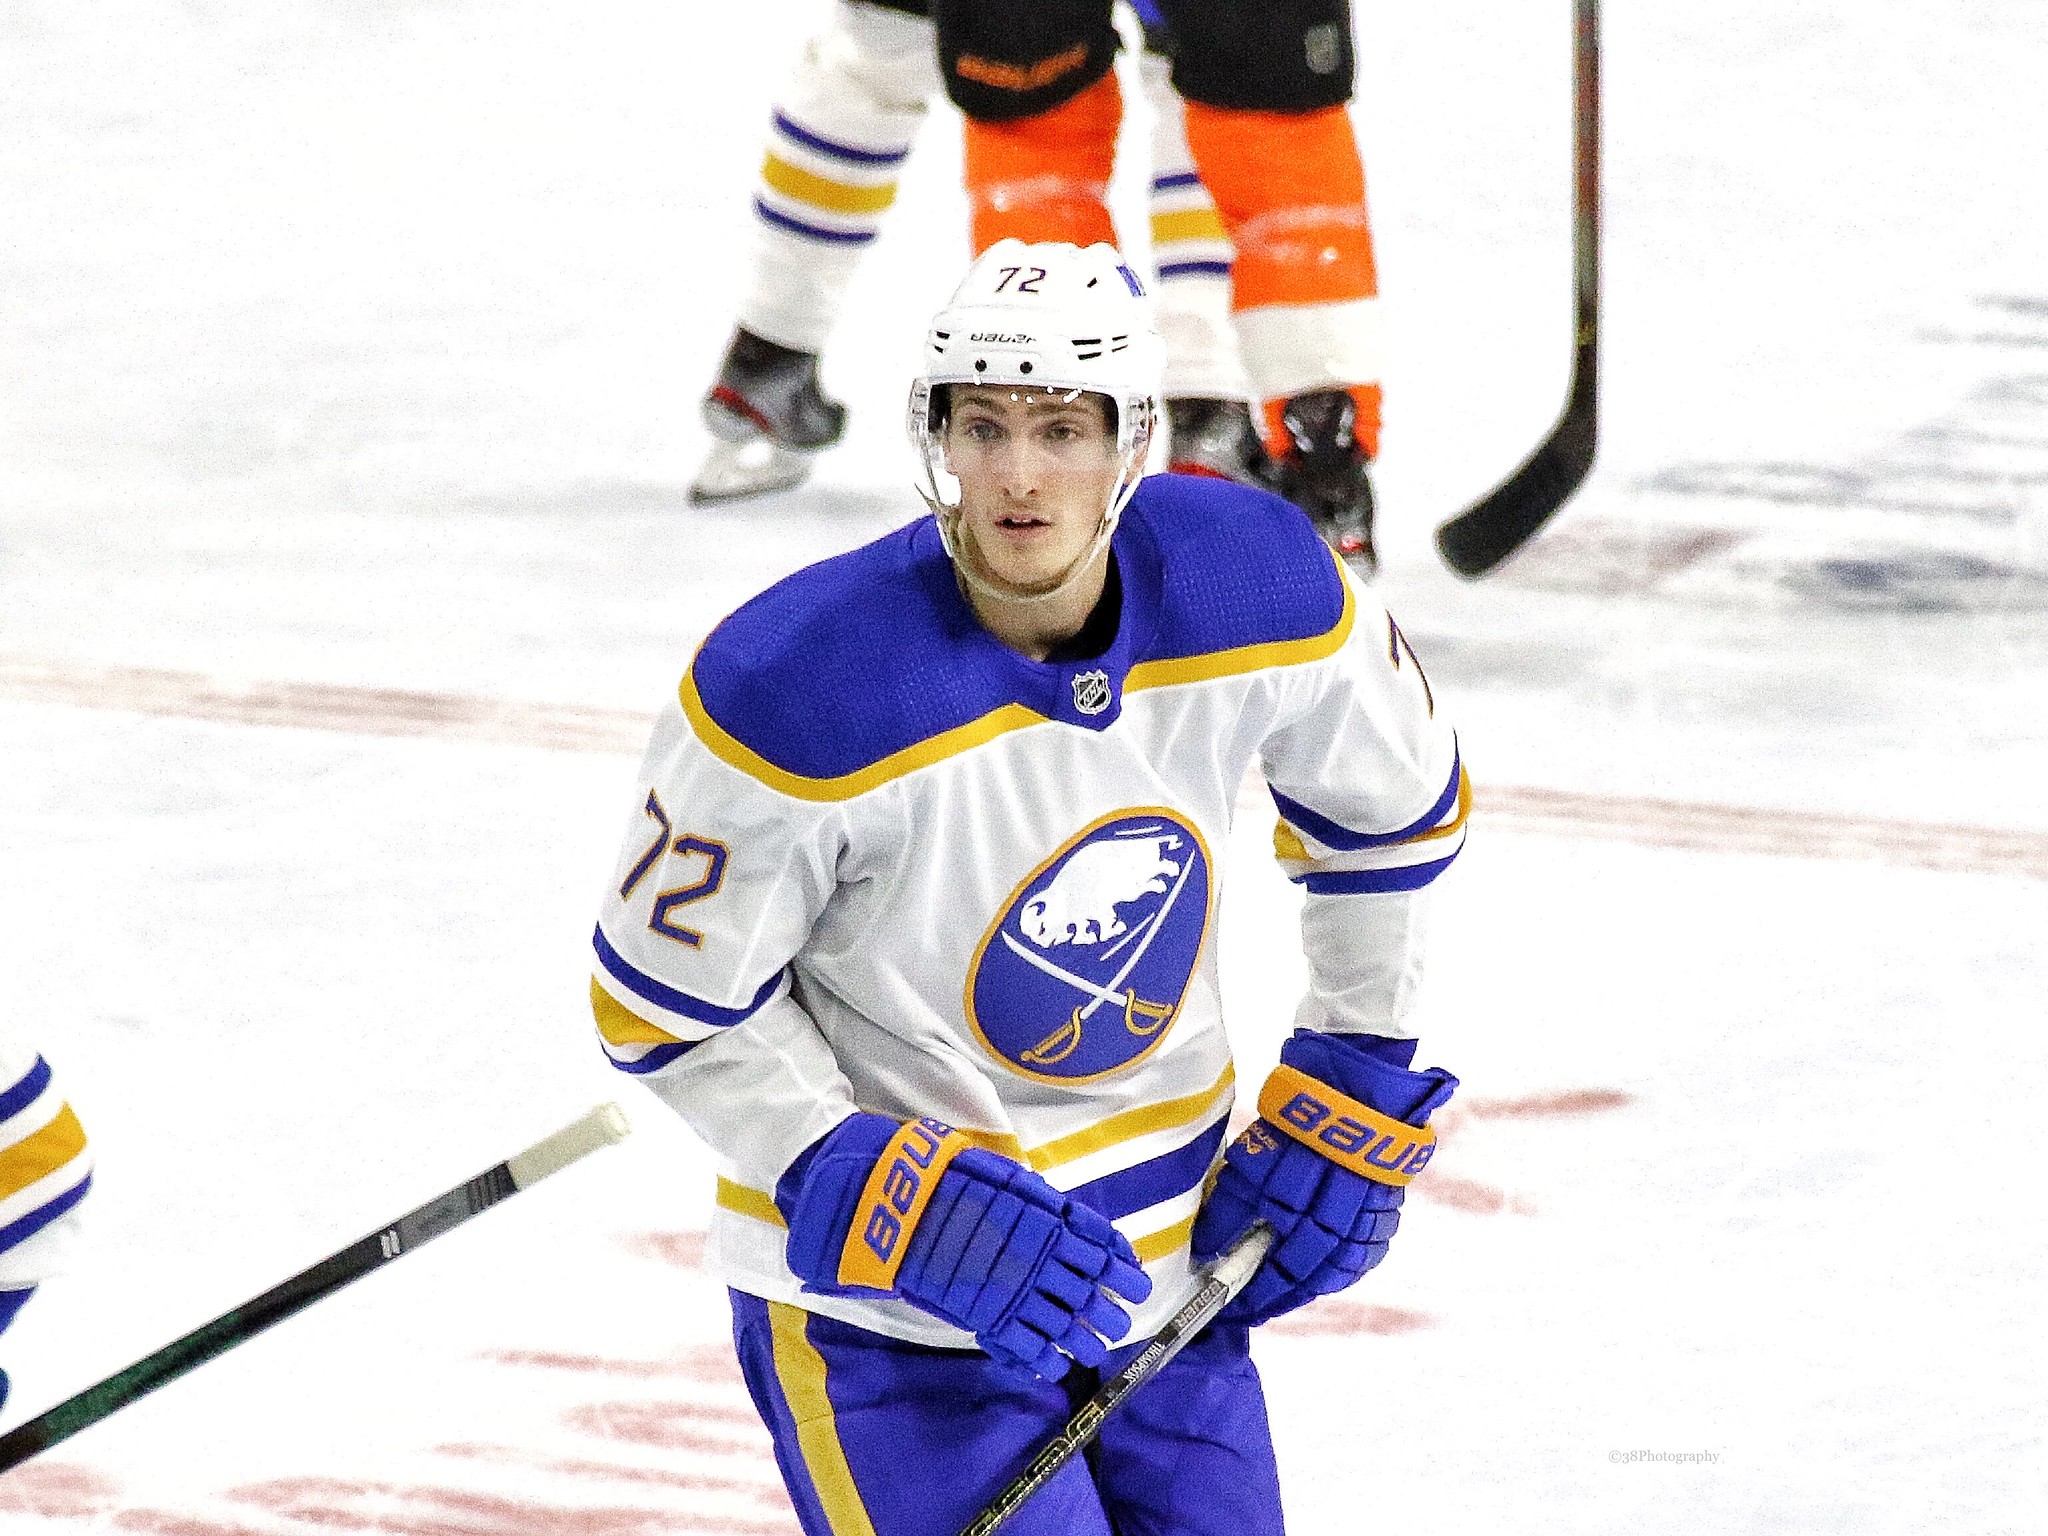 Buffalo Sabres fans won't appreciate Tage Thompson's controversial